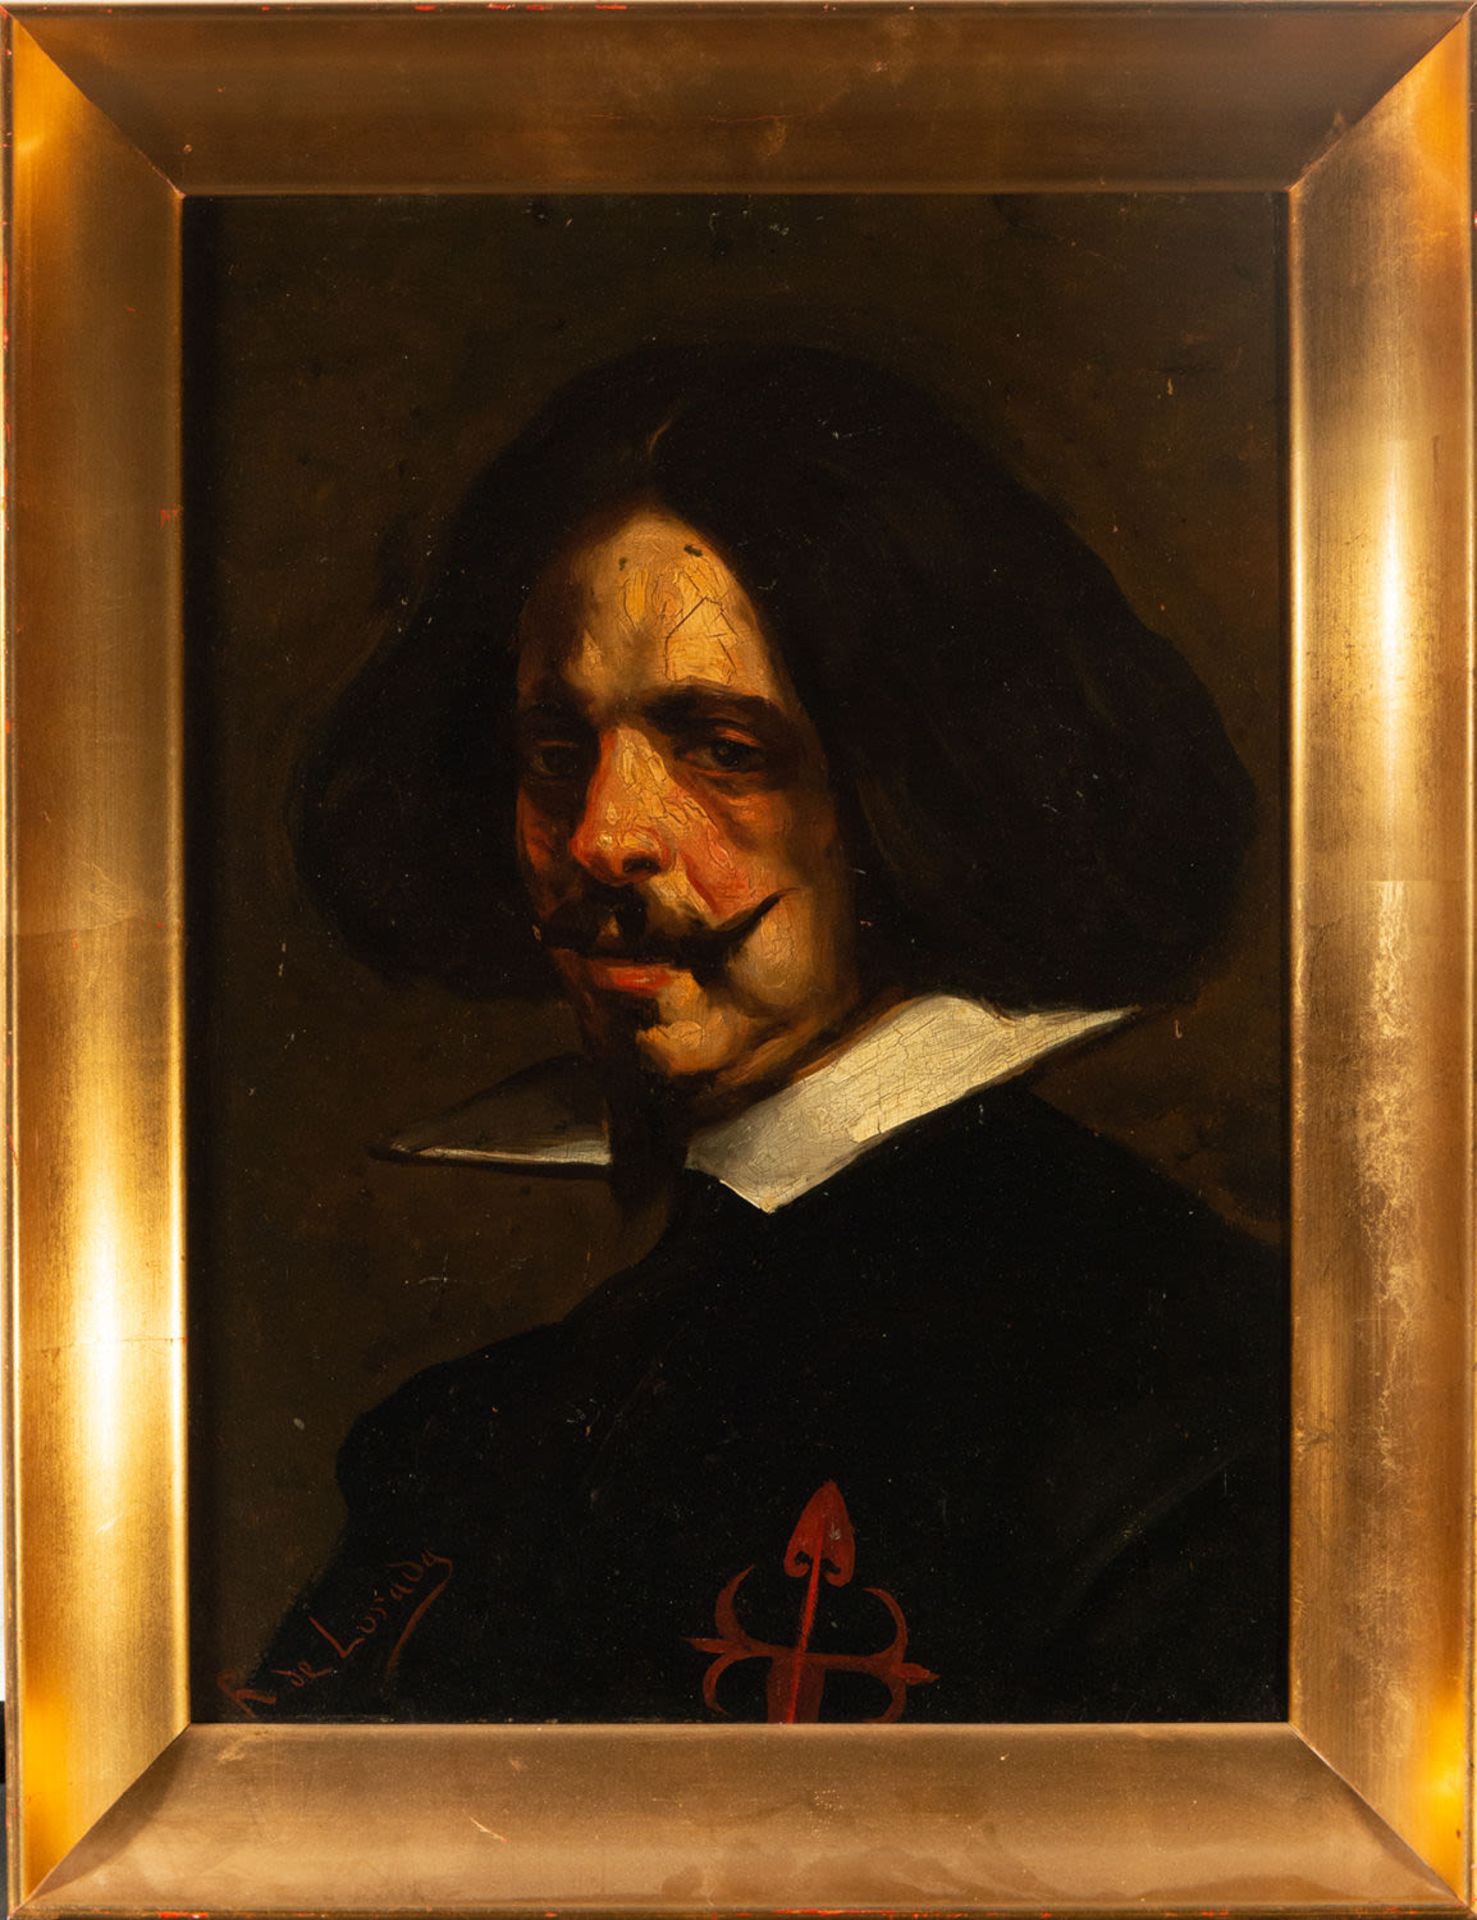 Self-portrait of Velázquez, following models of the 17th century, Spanish school of the 19th century